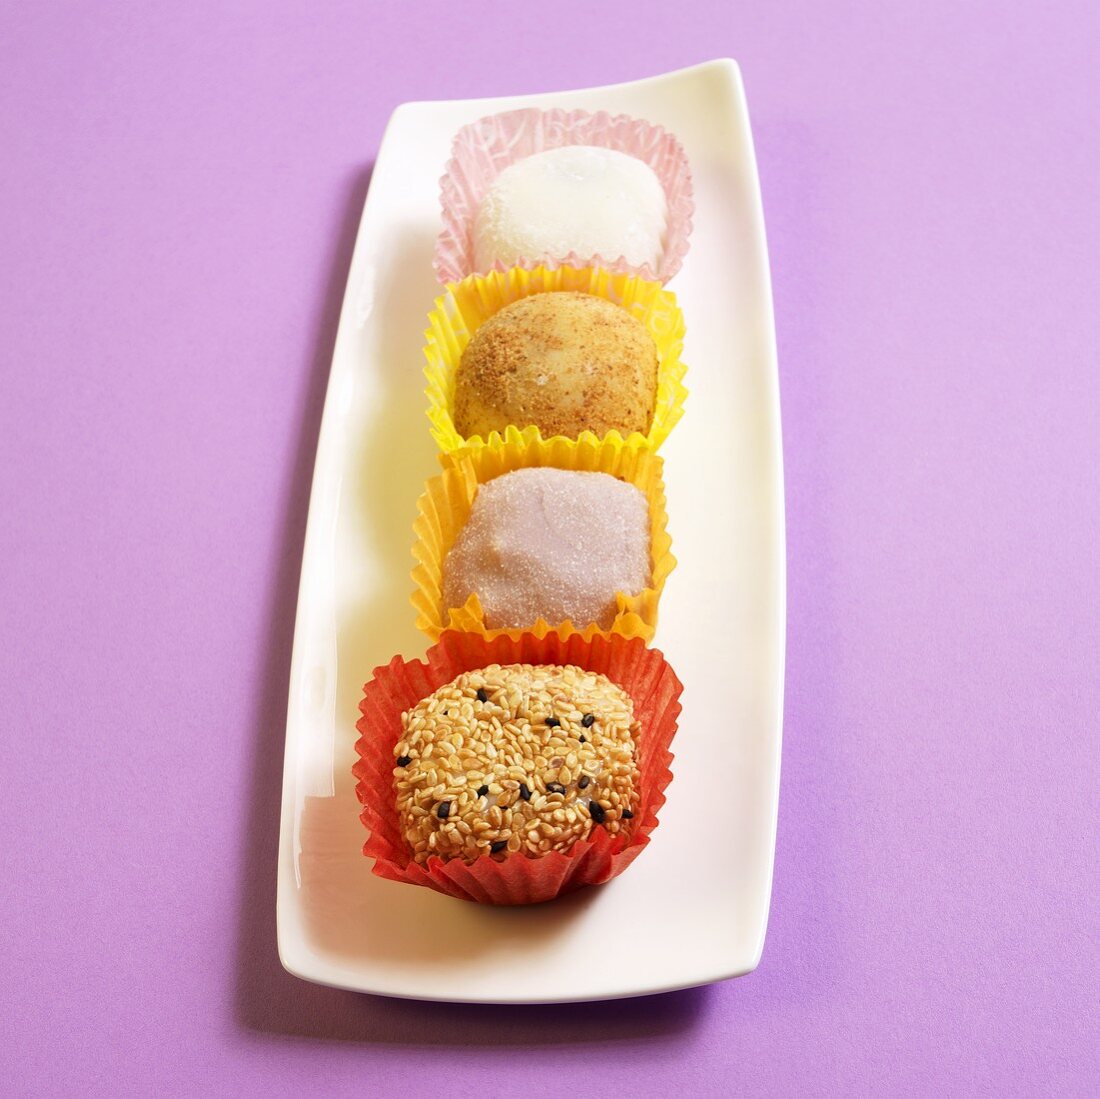 Japanese Mochi (sweets) on a White Platter; Purple Background